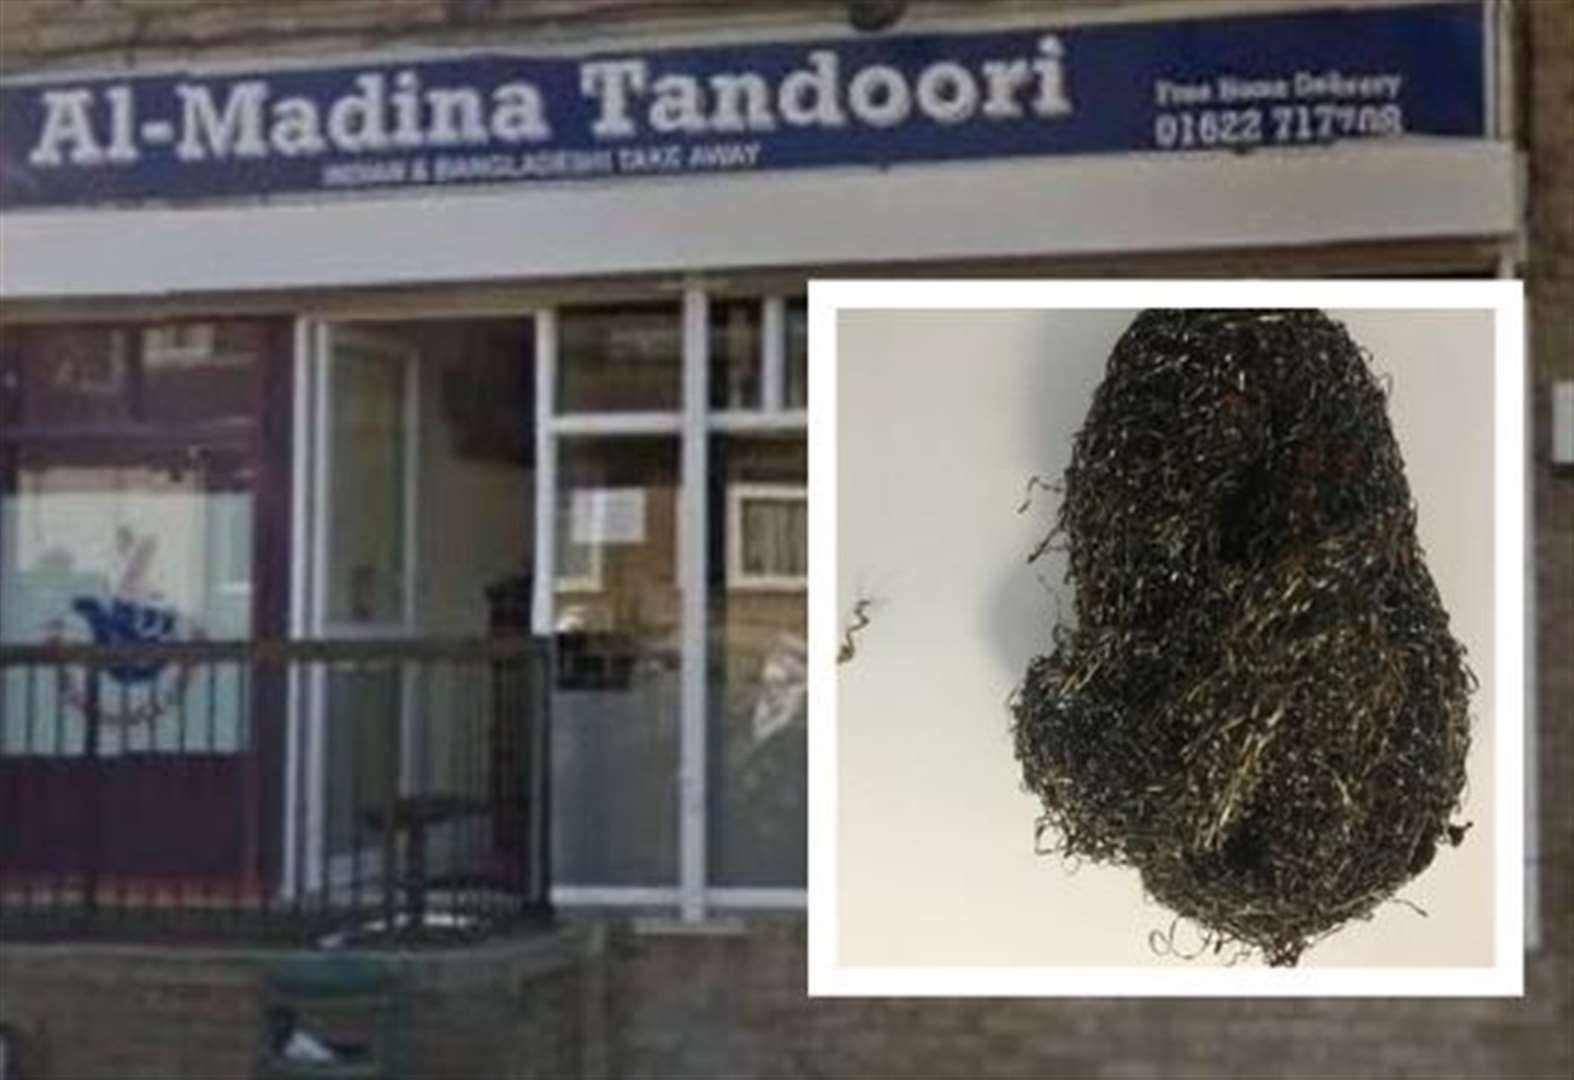 Tandoori fined £10k after wire wool found in curry